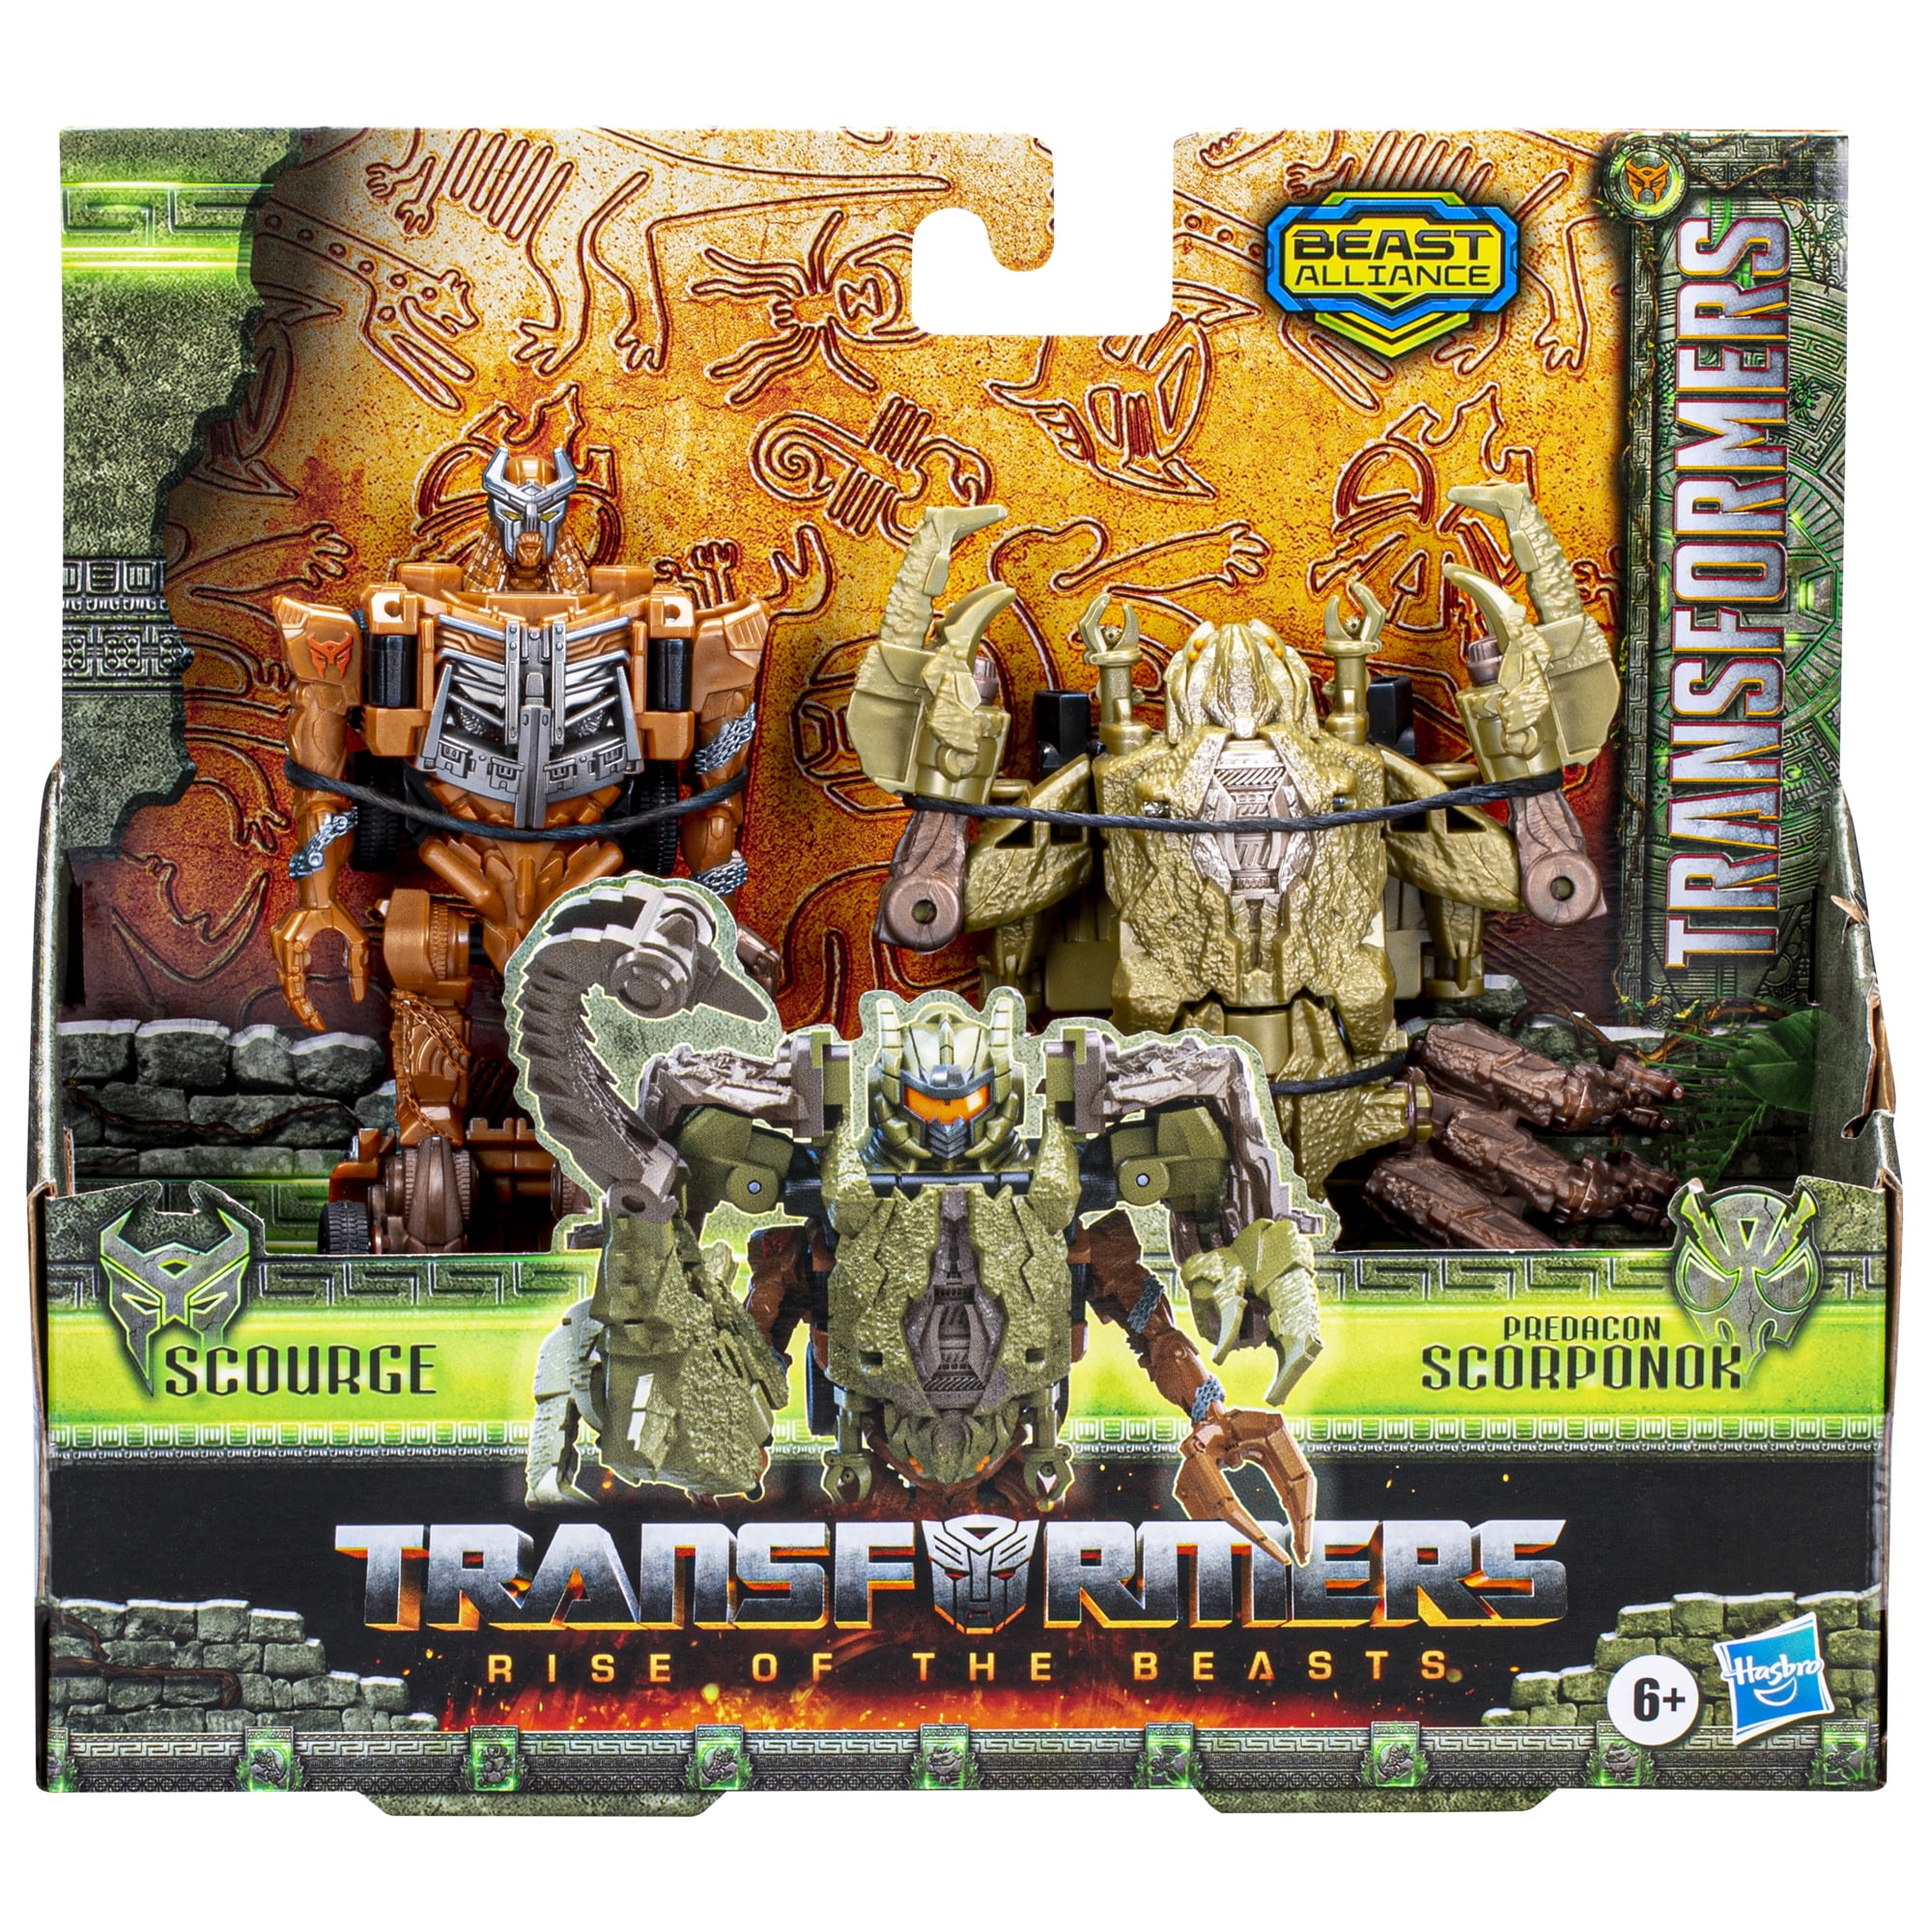 Transformers: Rise of the Beasts Scourge and Predacon Scorponok